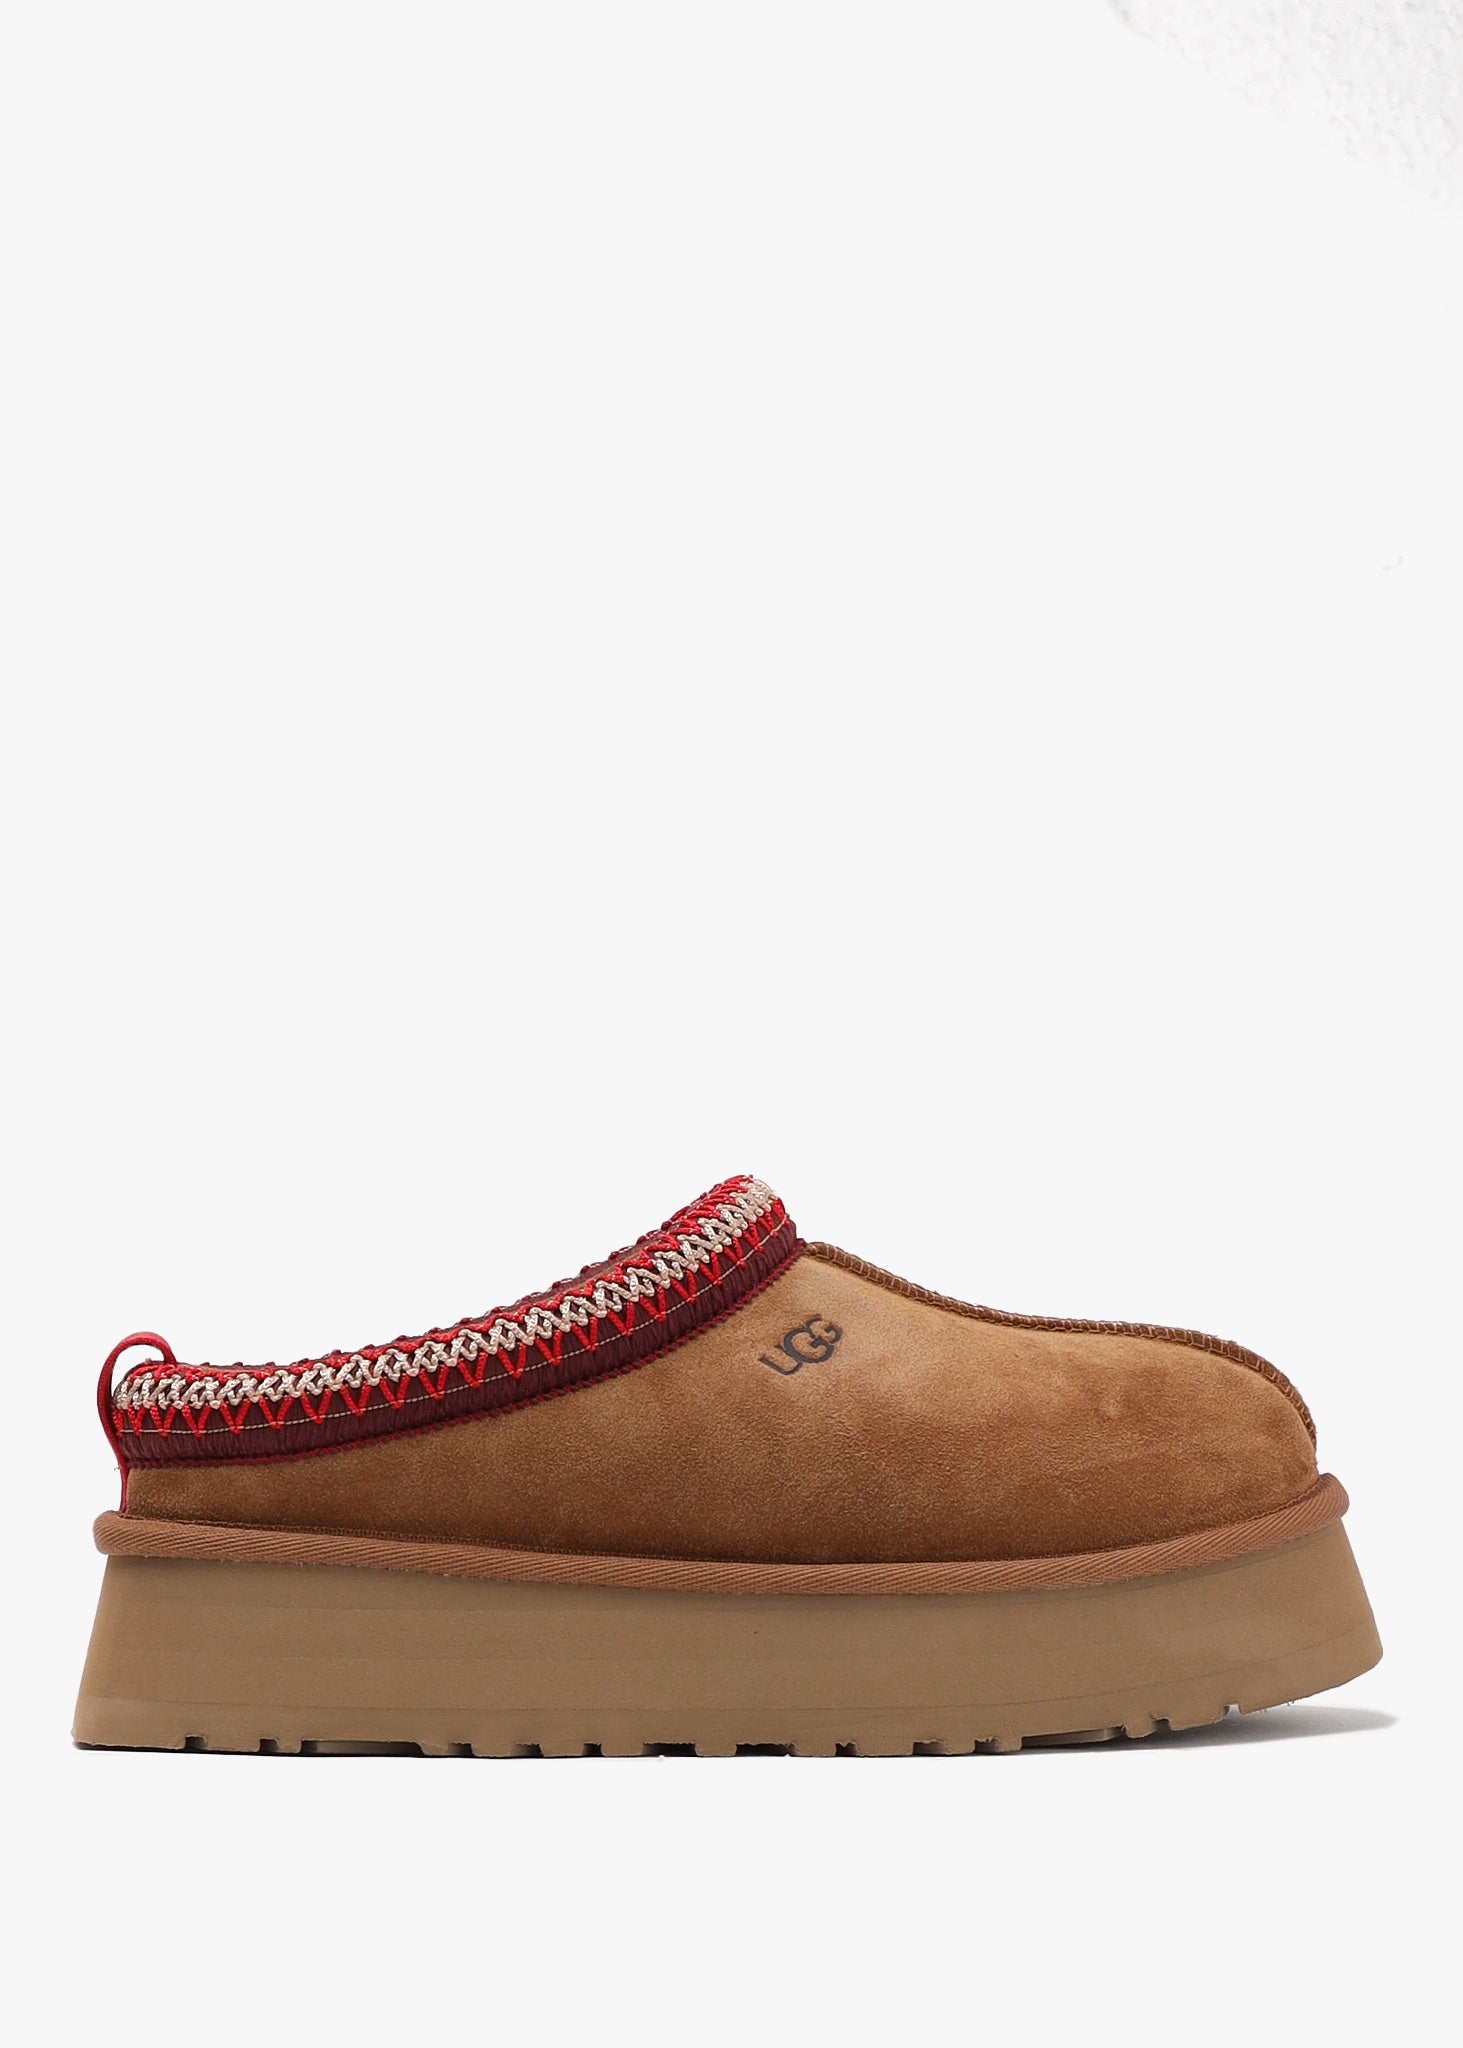 Image of Ugg Womens Tazz Platform Slipper With Embroidery In Chestnut